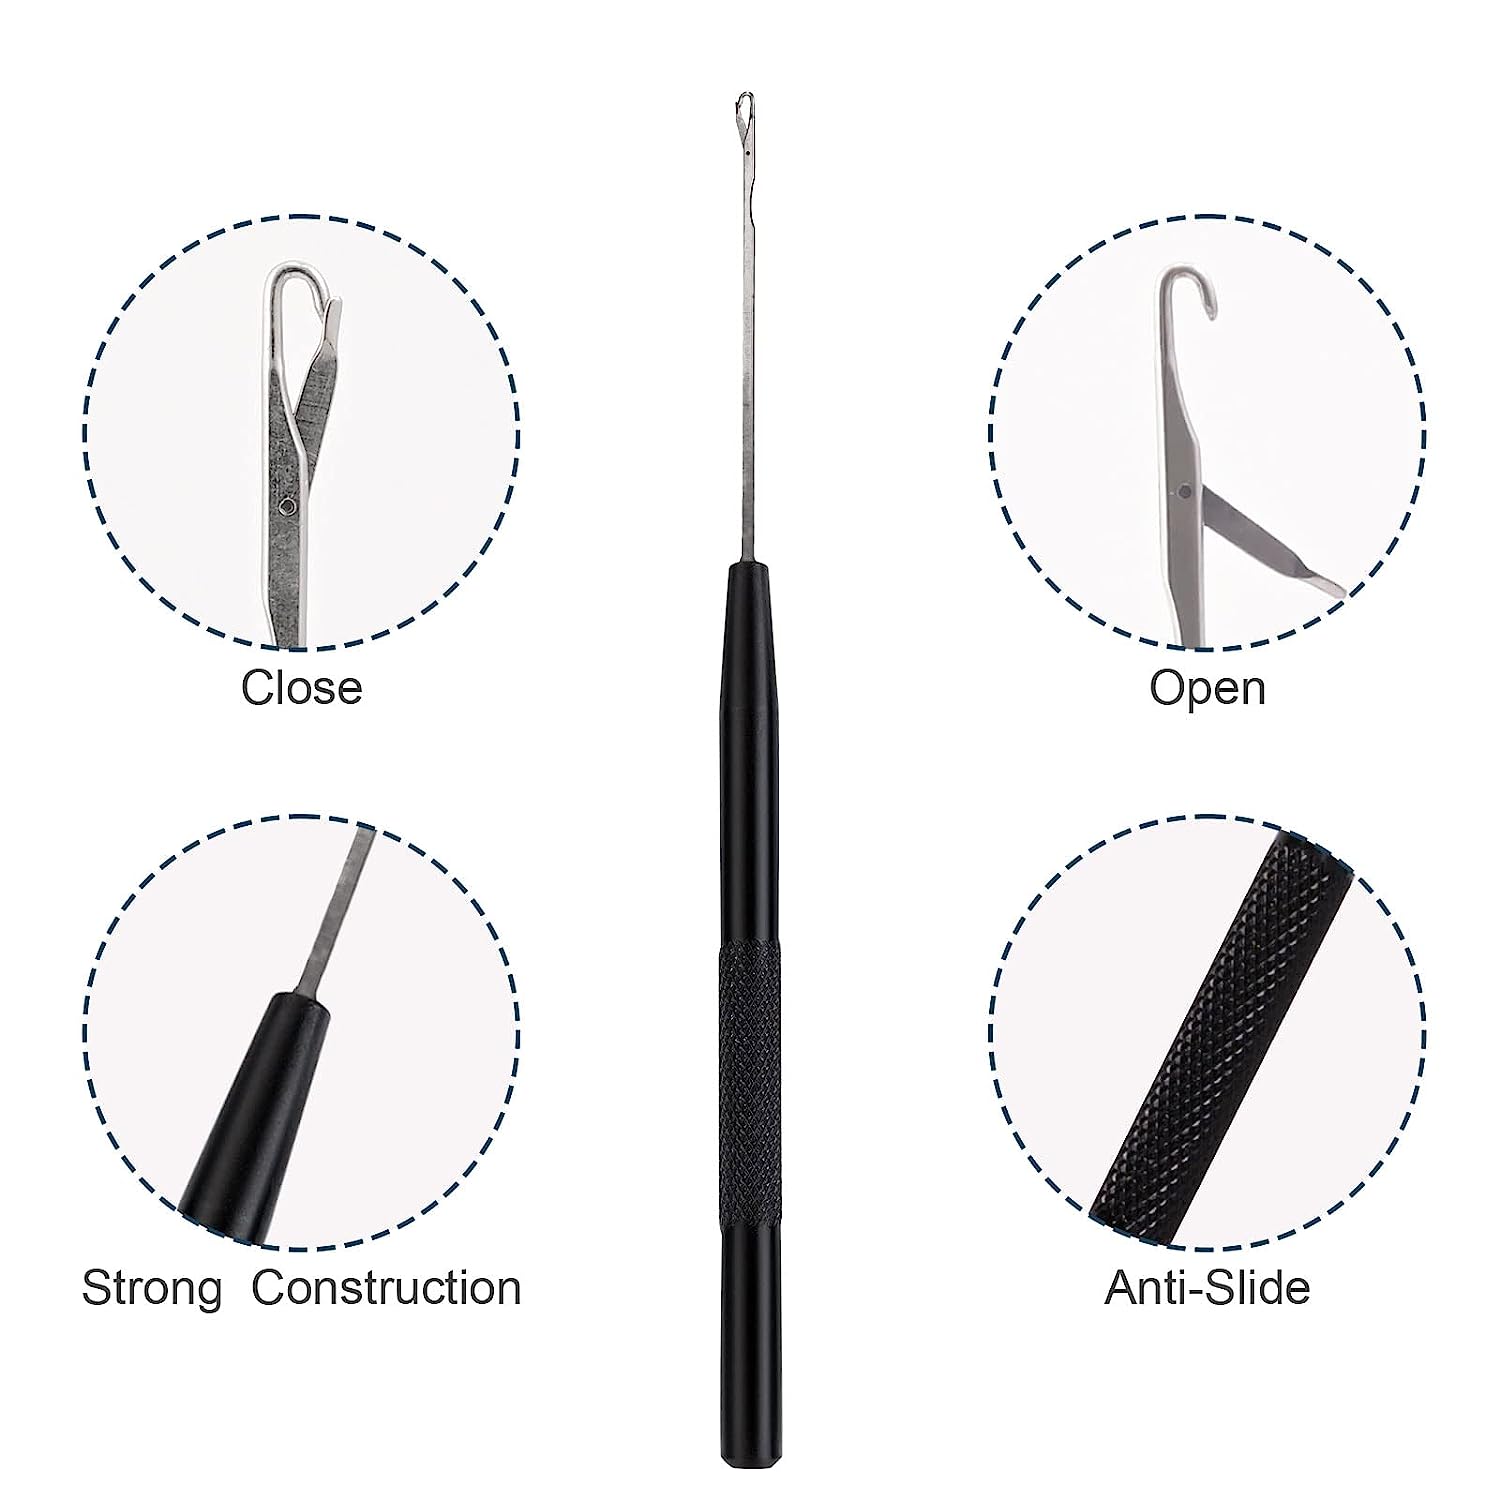 Stainless Steel Hair Extensions Loop Needle Pulling Hook Tool, 3 Pcs Micro Needle Threader Wire Pulling Crochet Hook Tools for Silicone Microlink